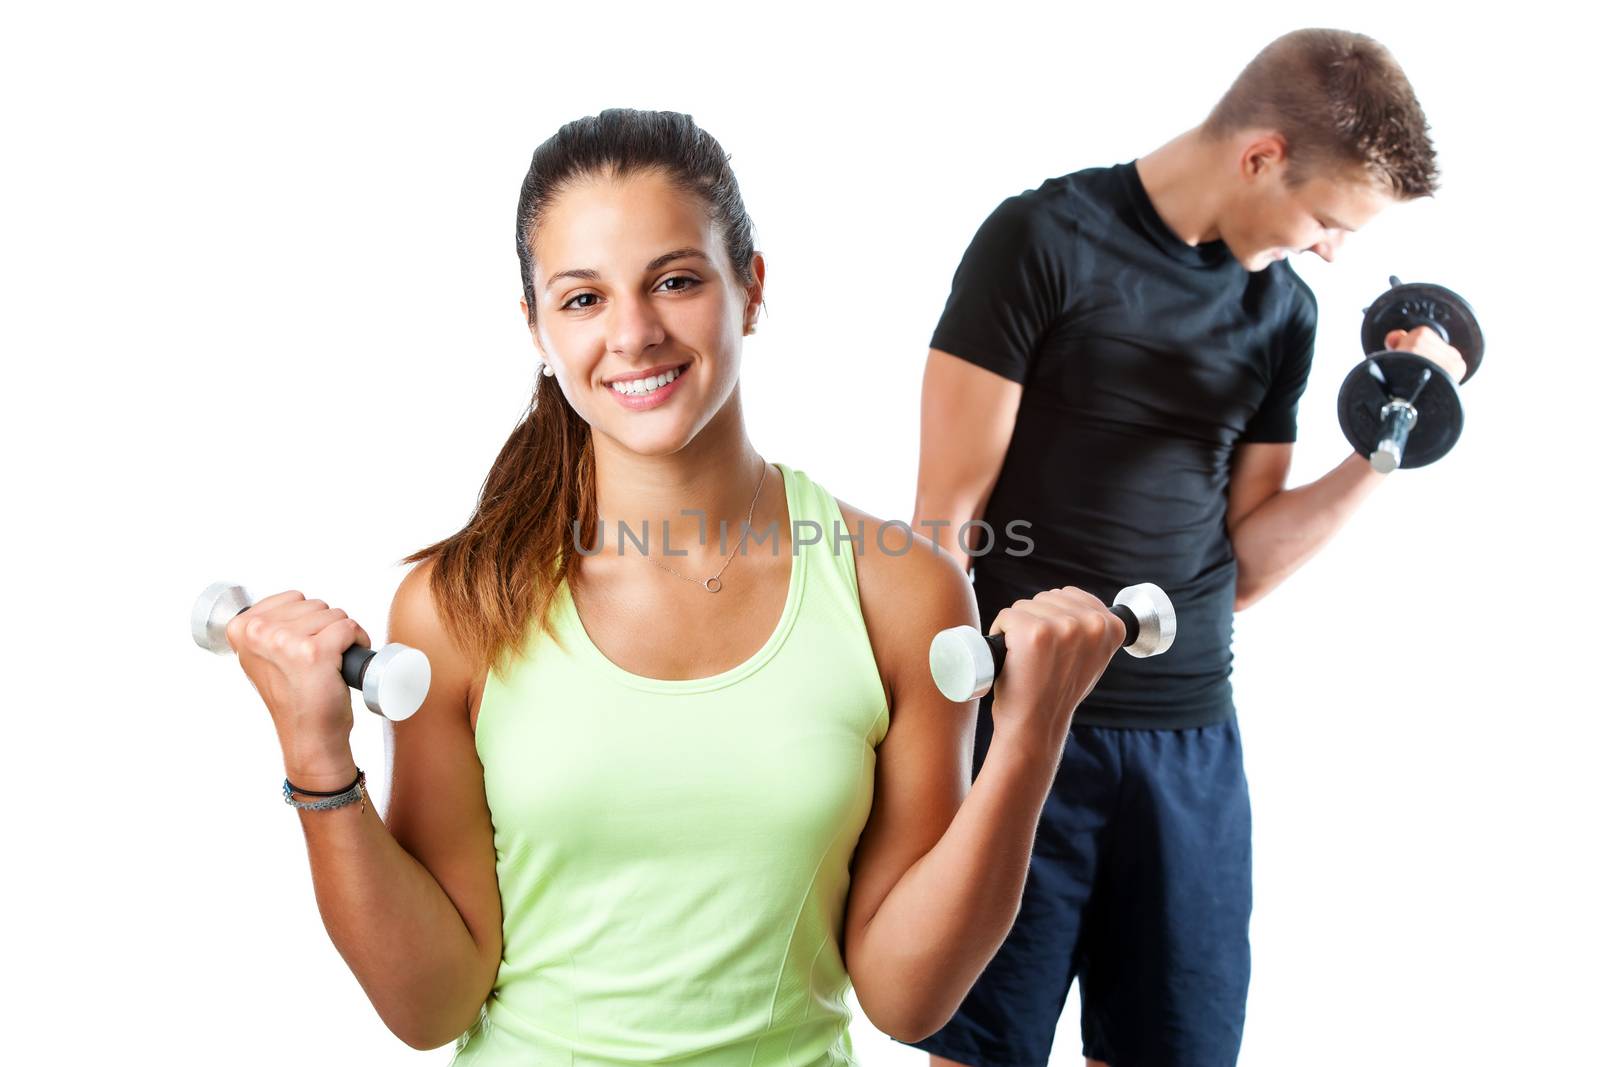 Teen girl working out with boy in background. by karelnoppe